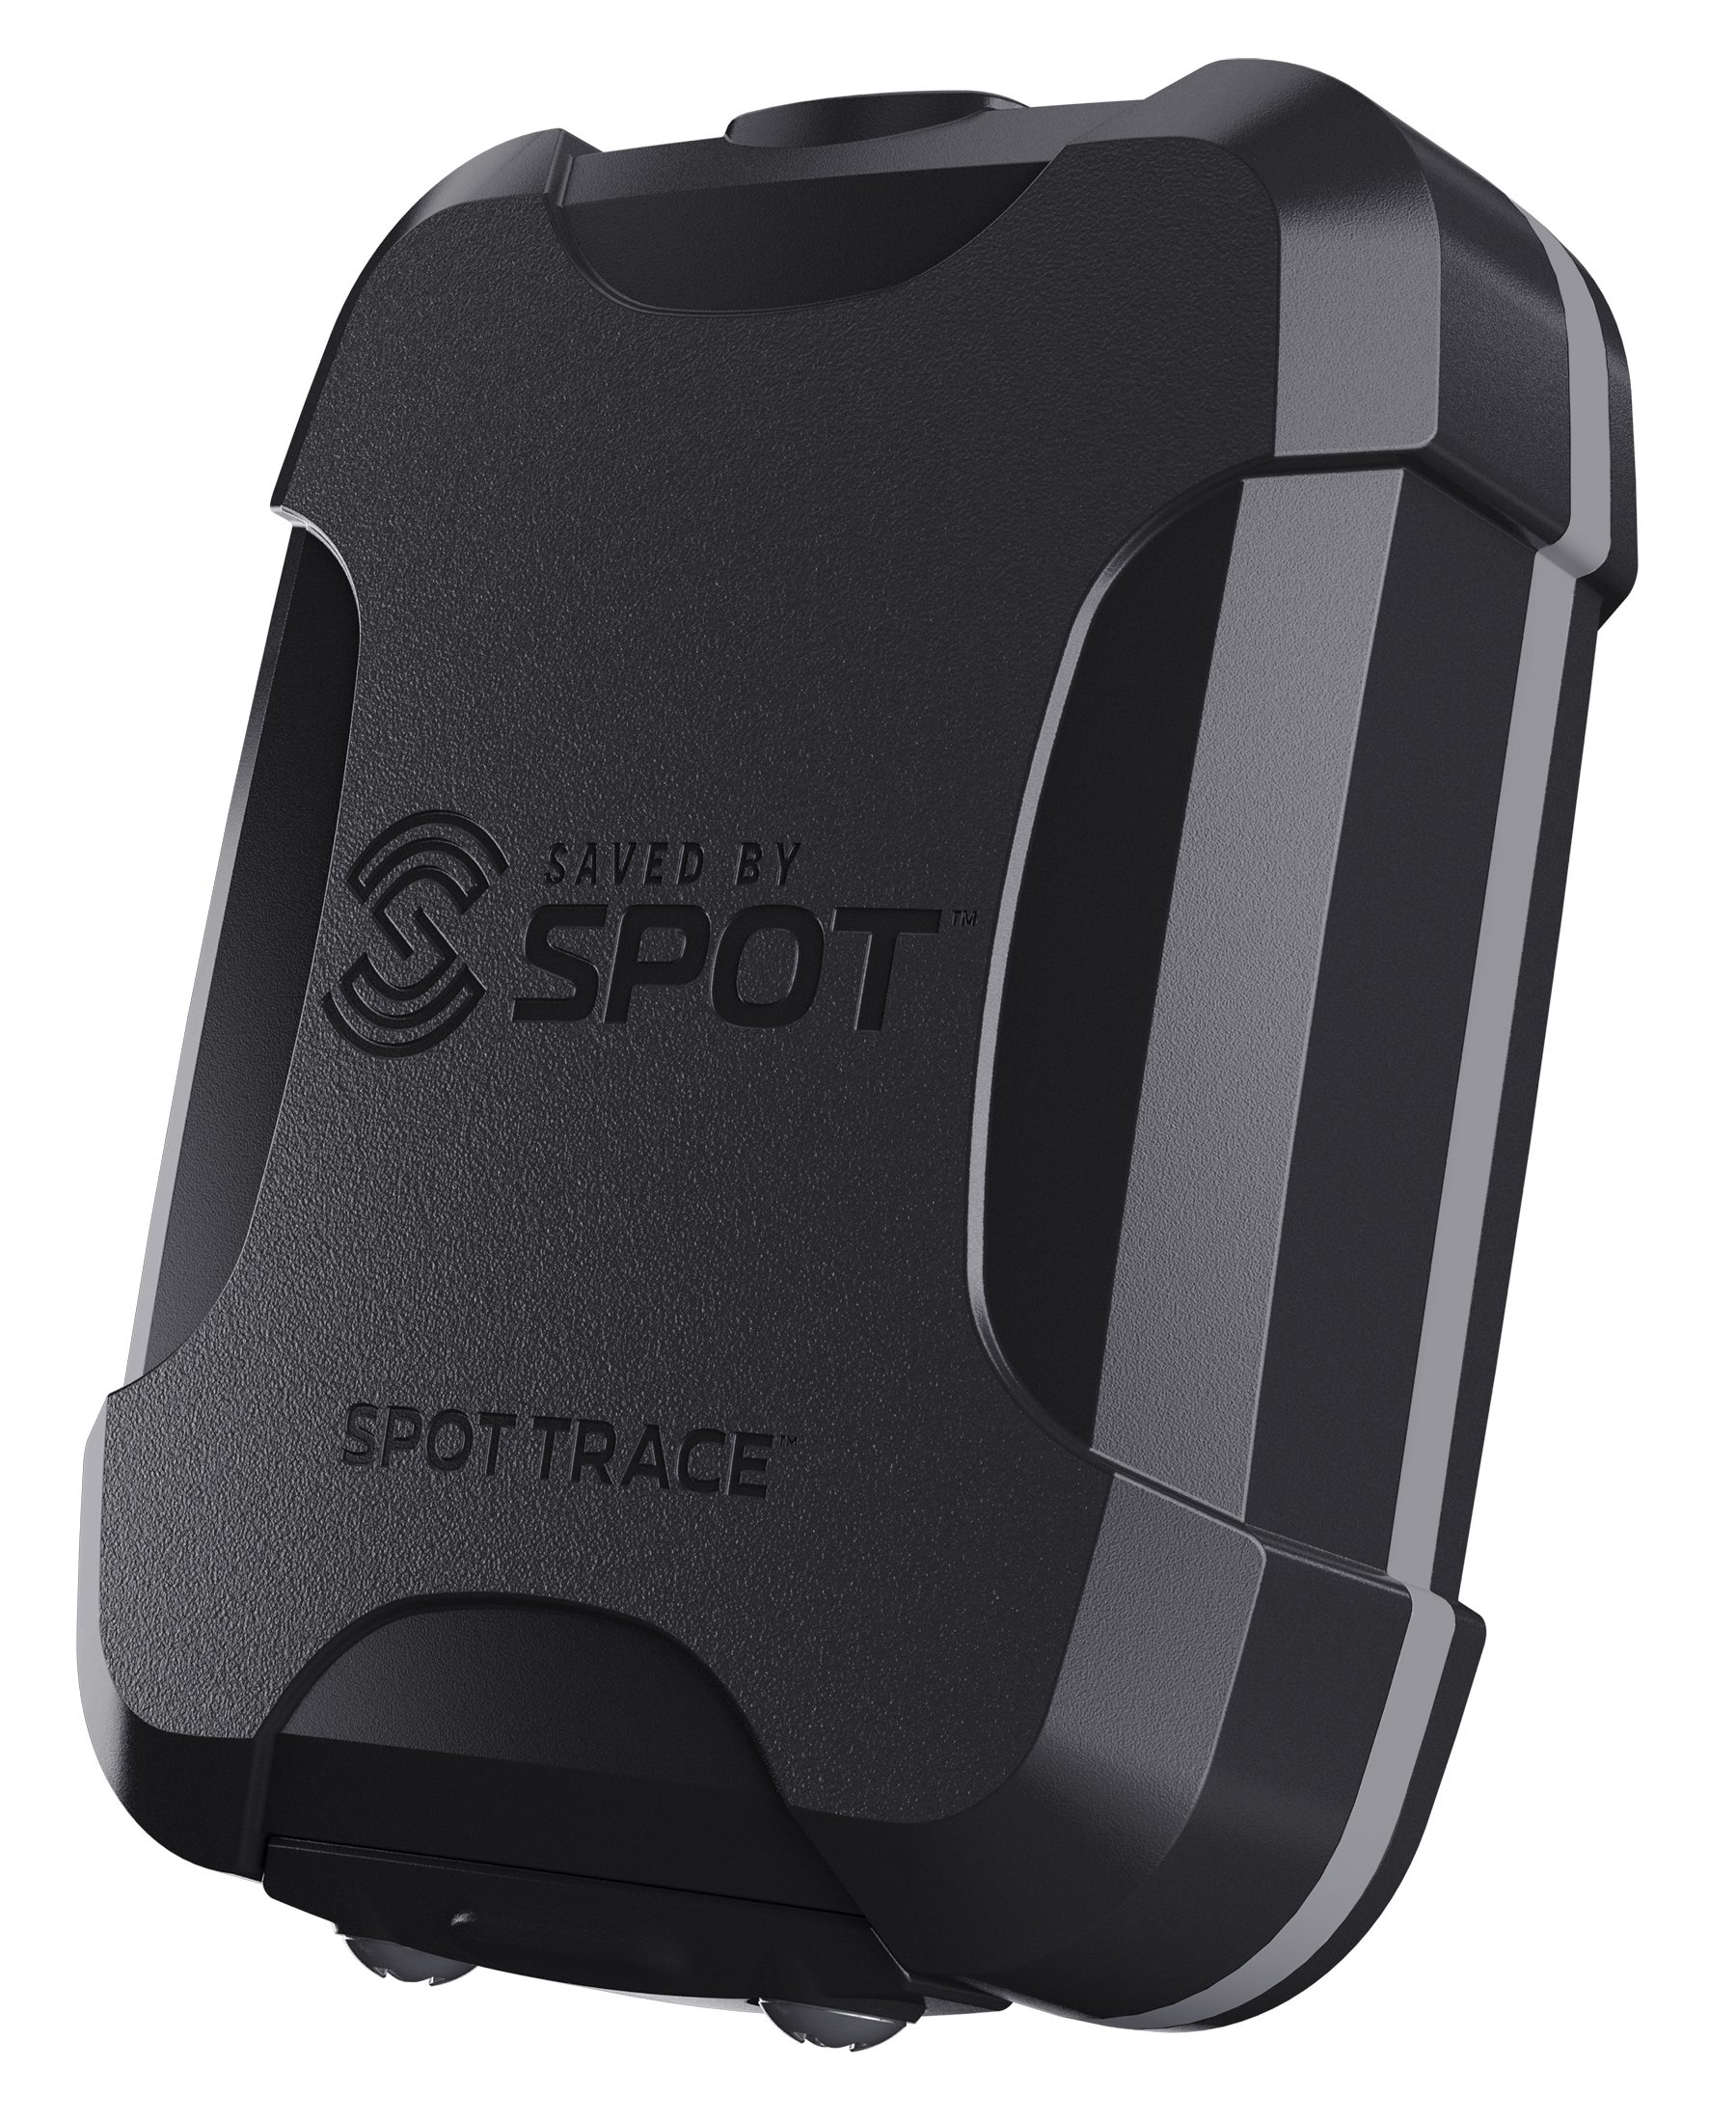 spot-trace-satellite-tracking-device-2023-lonestar-tracking